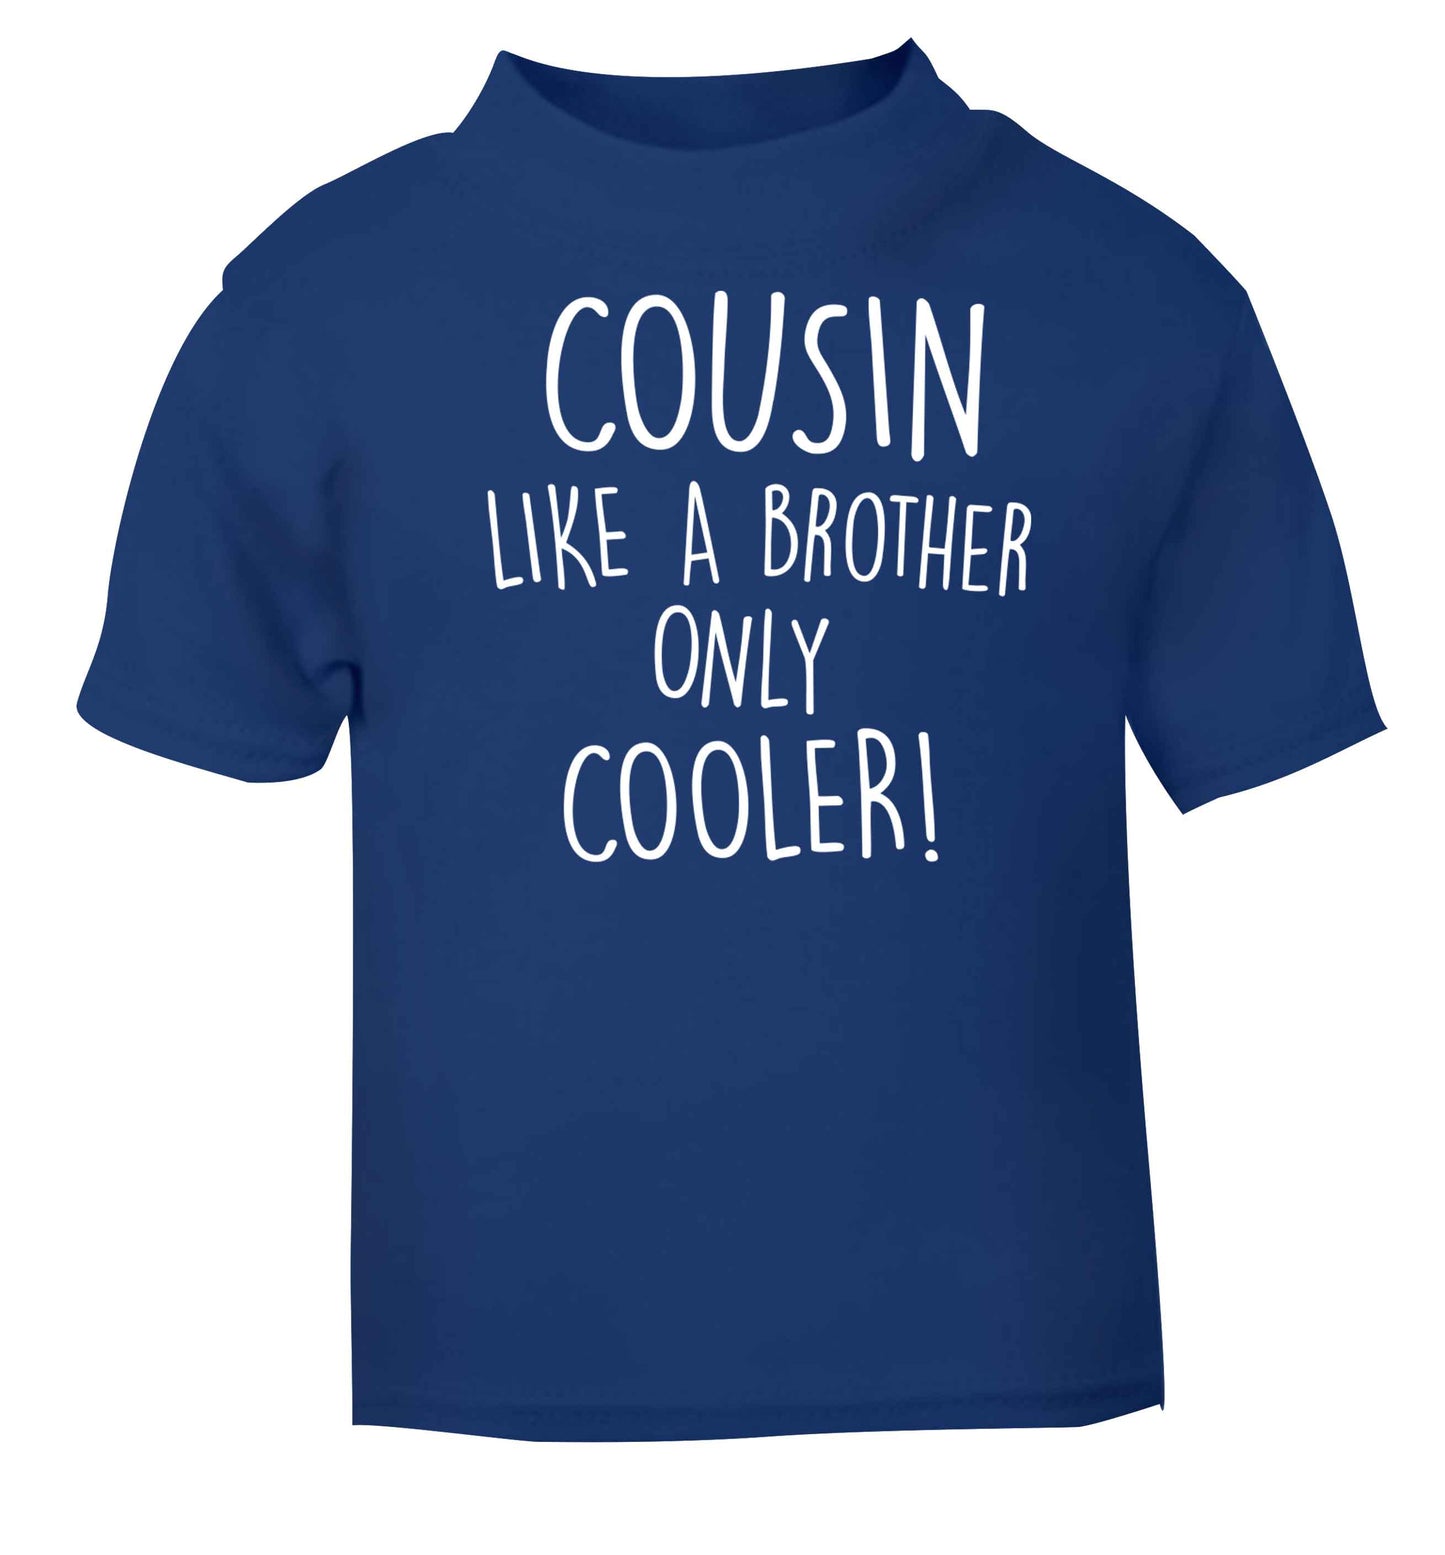 Cousin like a brother only cooler blue baby toddler Tshirt 2 Years